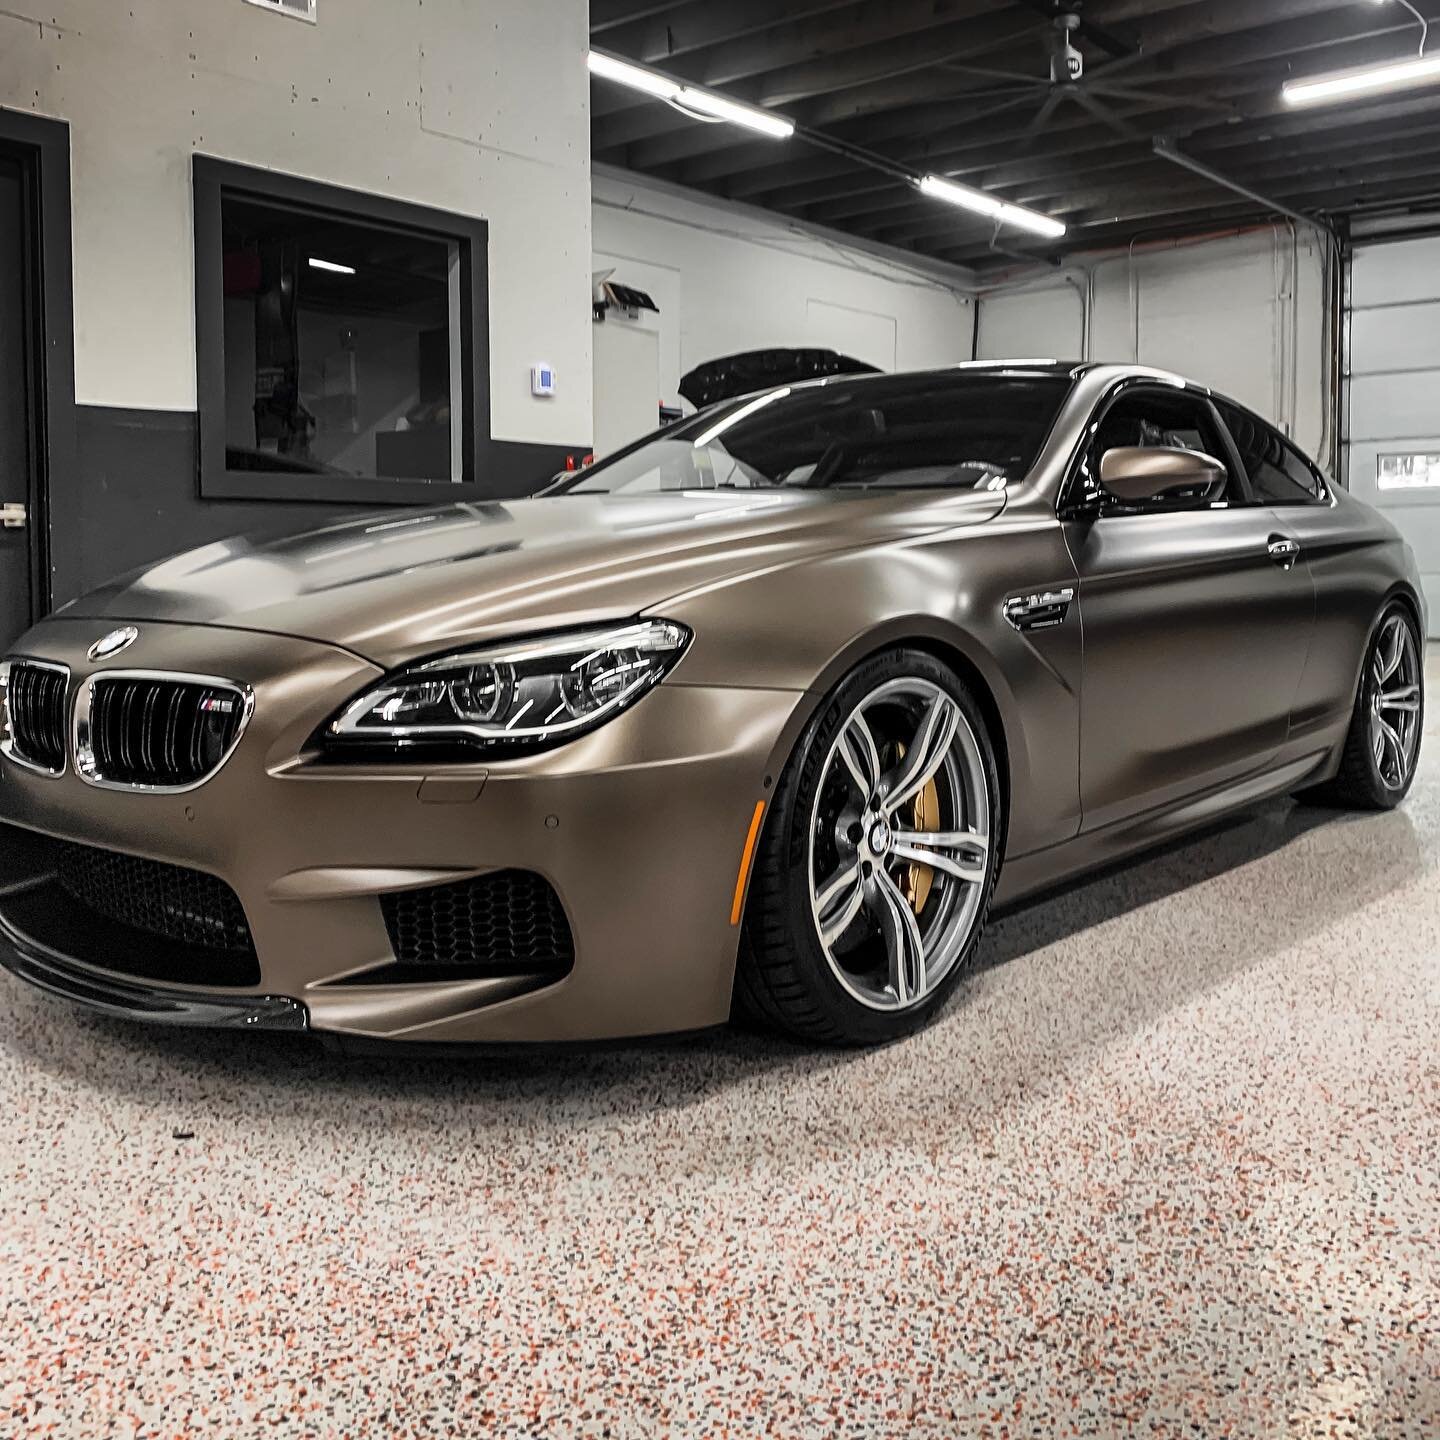 This one is a beauty - Frozen bronze metallic paint with the carbon fiber accents and a set of H&amp;R&rsquo;s to top it off 👌

#f13 #f13m6 #bmwm6 #m6 #drivetastefully #hrsprings #mpower #bmwm #bmwmpower #inlineautowerks #automotivetechnician #autom